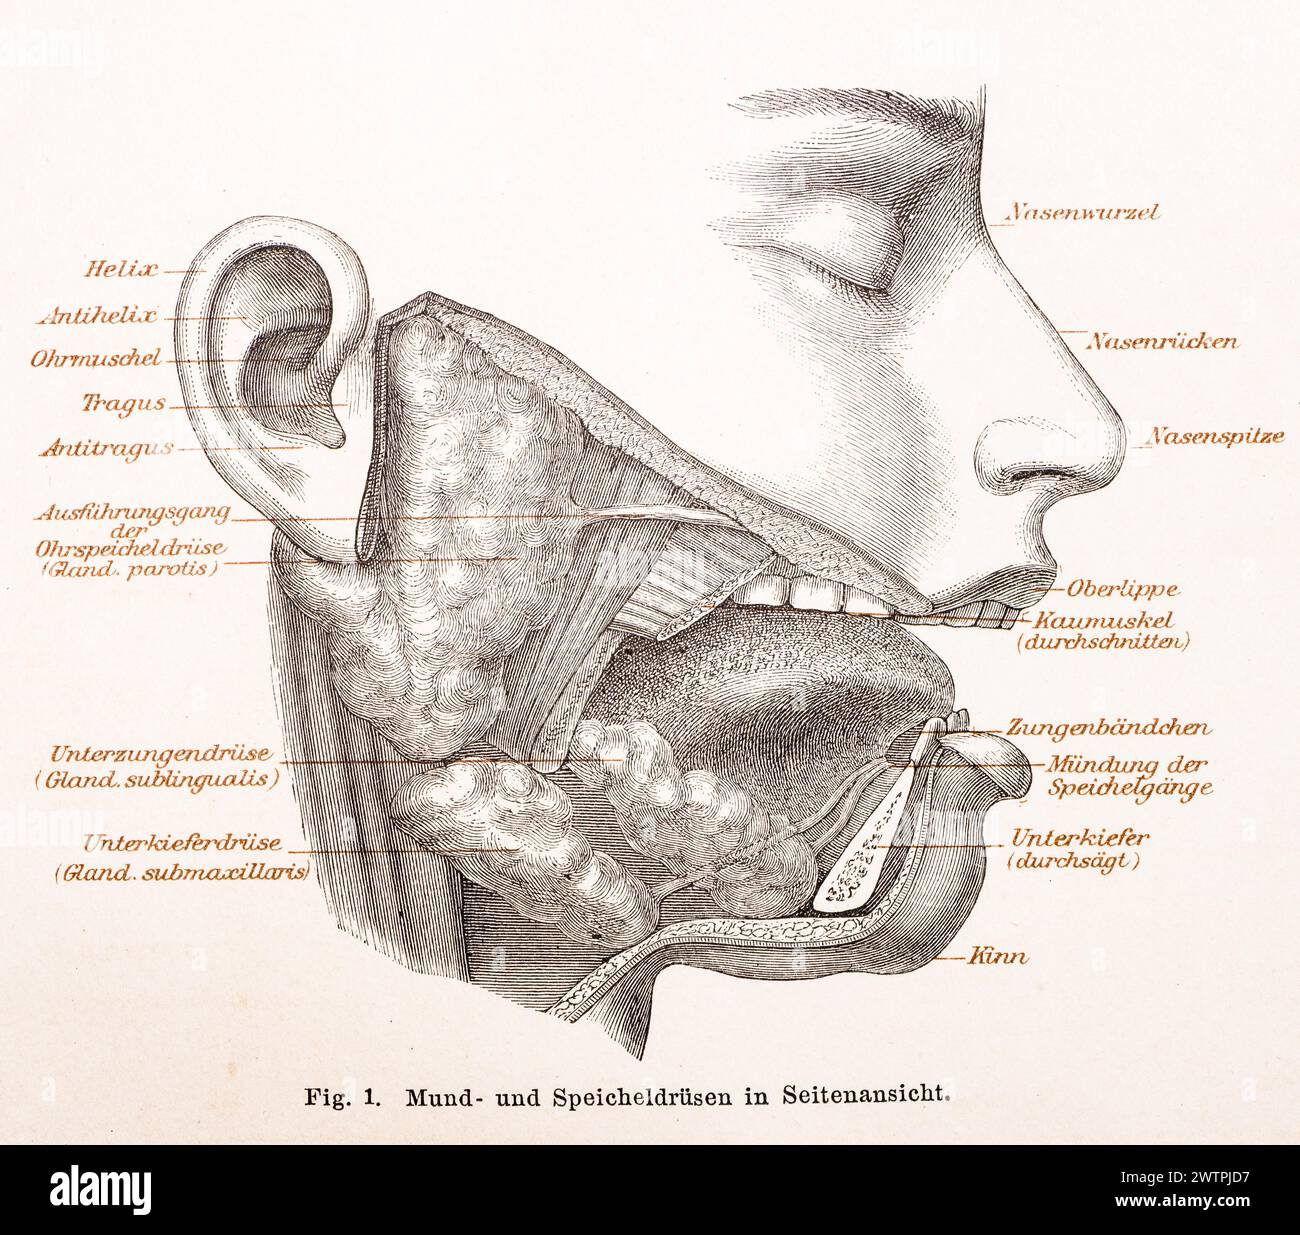 Medicine, anatomy, drawing of the human face with oral and salivary glands, helix, antihelix, auricle, tragus, antitragus, excretory duct of the Stock Photo